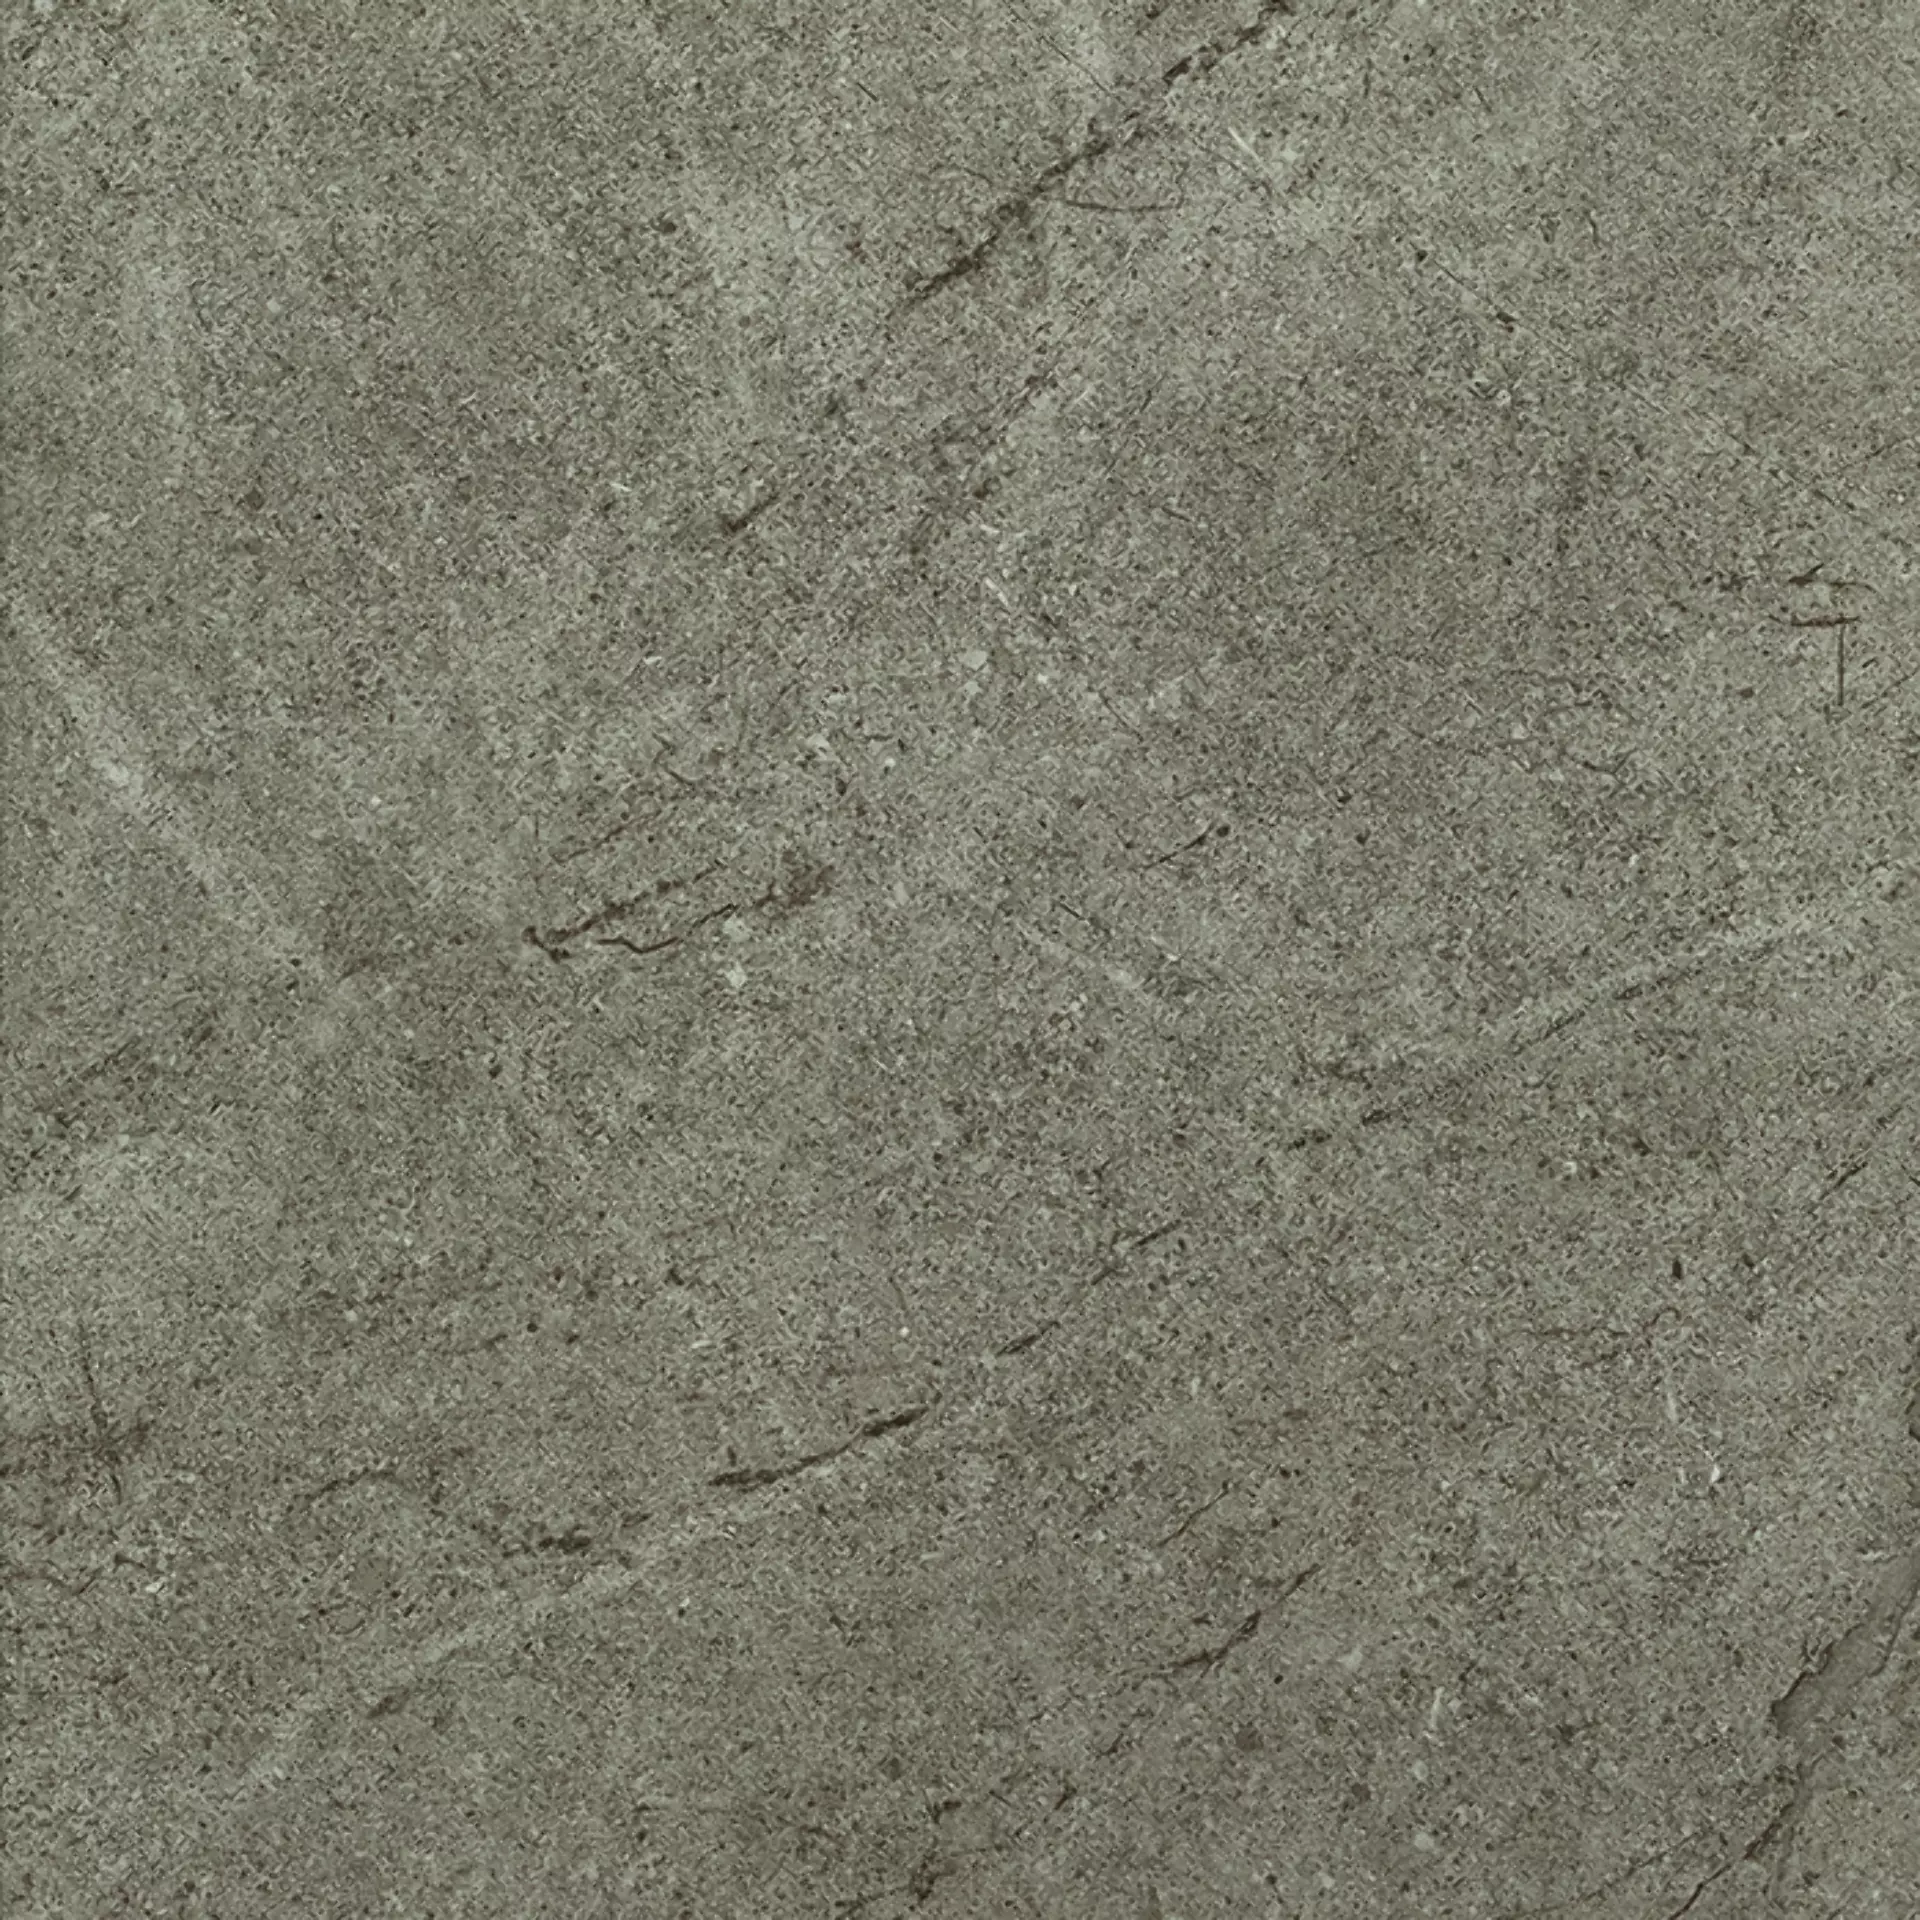 Cercom Archistone Taupe Naturale 1081721 120x120cm rectified 9,5mm